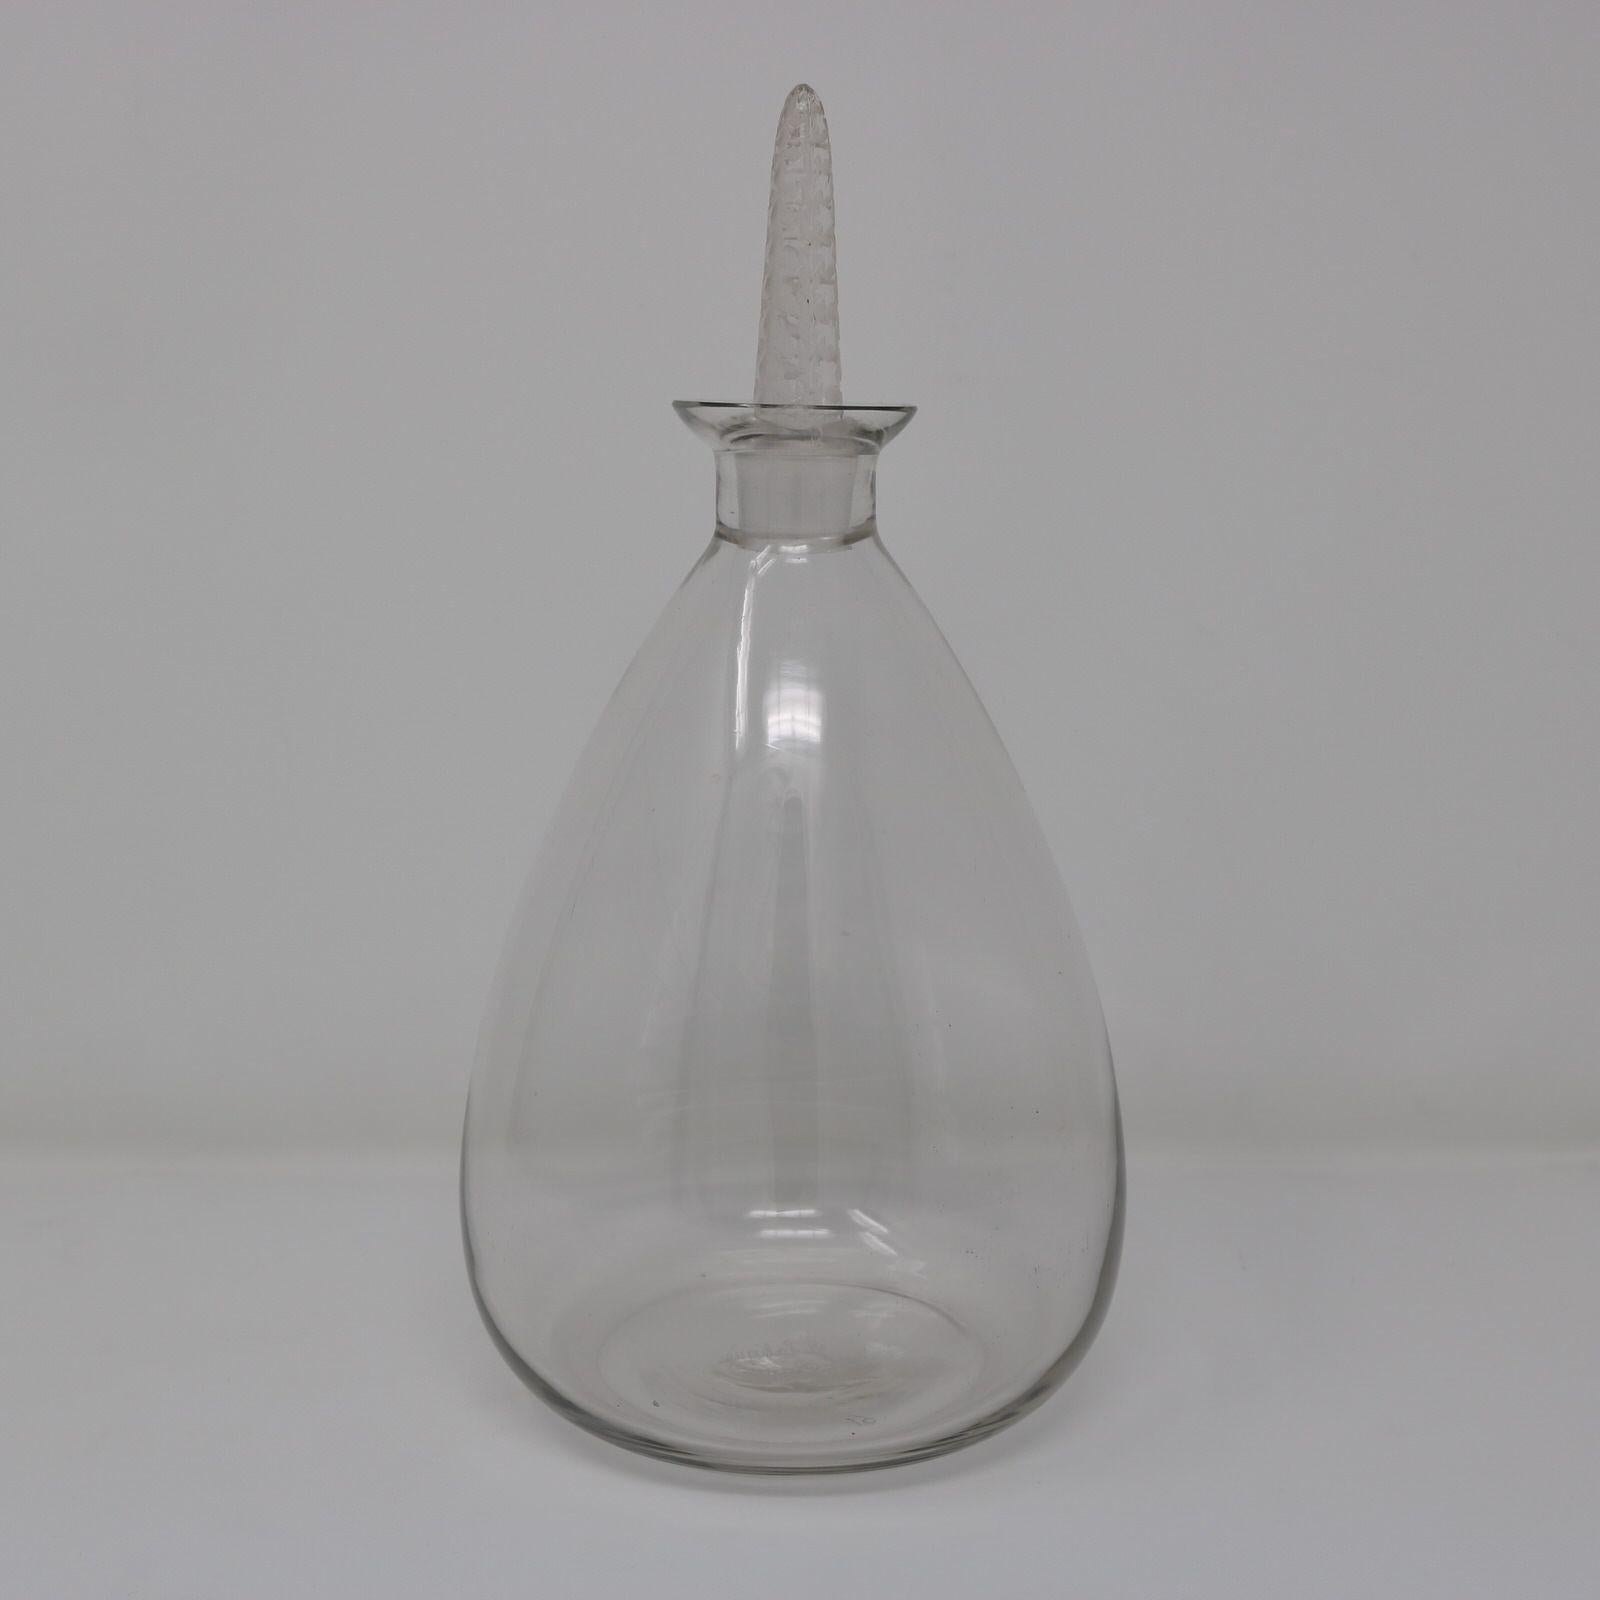 Rene Lalique clear glass 'Dornach' decanter. Has a bulbous shaped bottle. The clear and frosted glass stopper has a geometric pattern of leaves running up it. Inscribed makers mark, 'R Lalique France' and '19' to the base. Book reference: 'R.